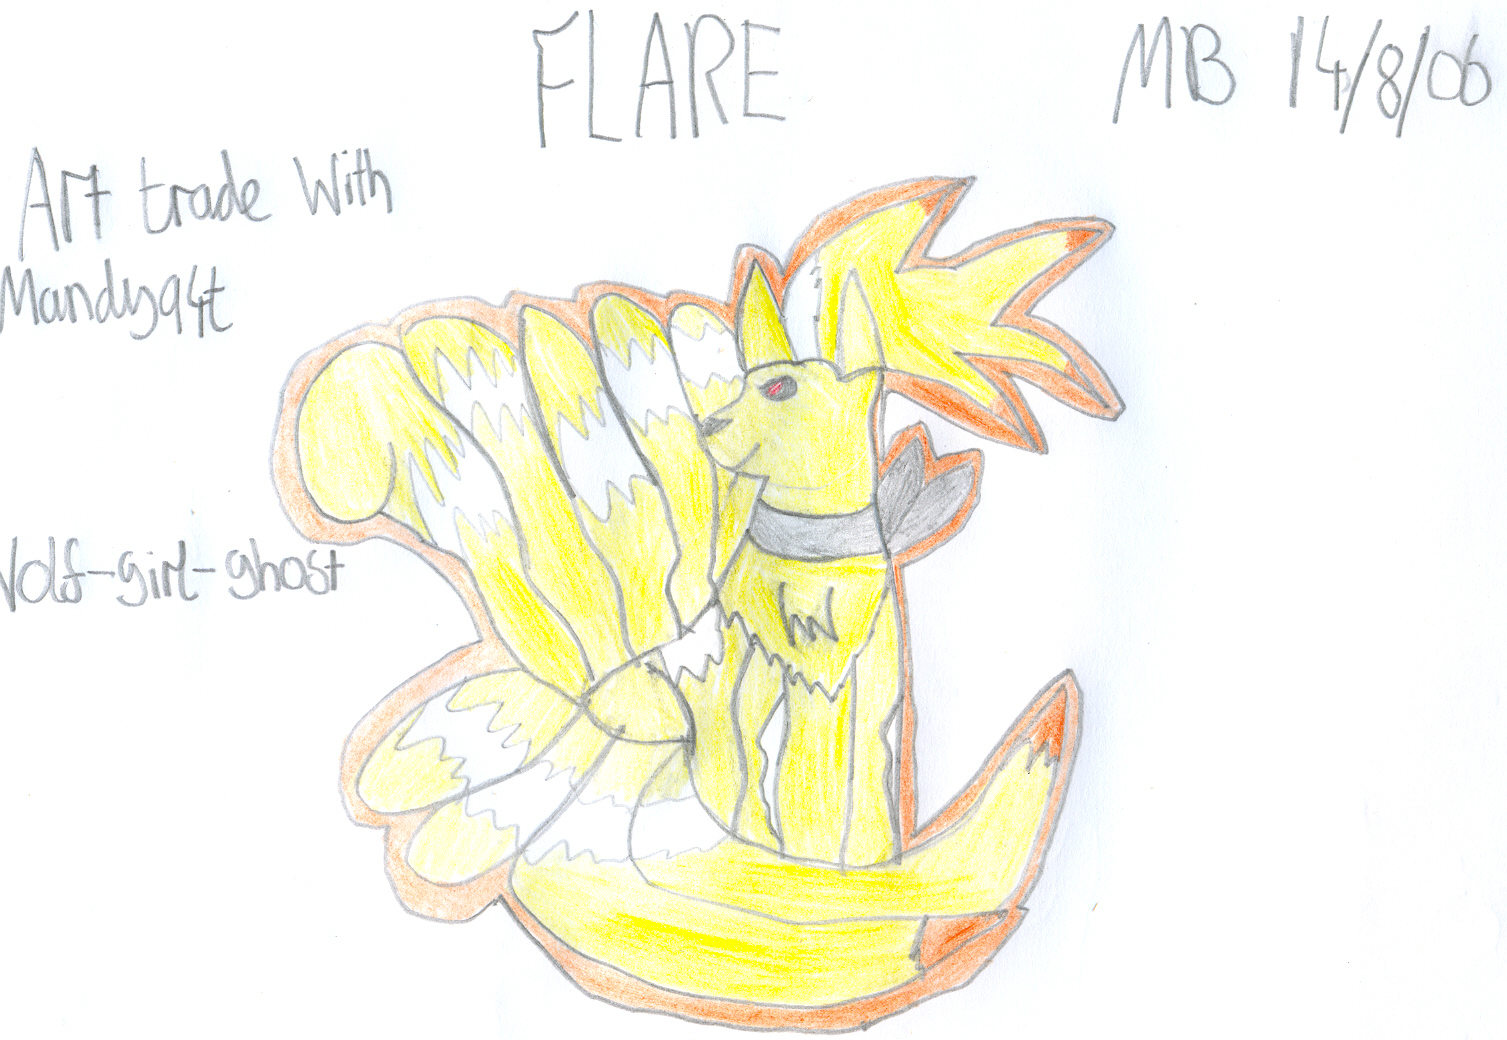 flare art trade with mandy94t by wolf-girl-ghost